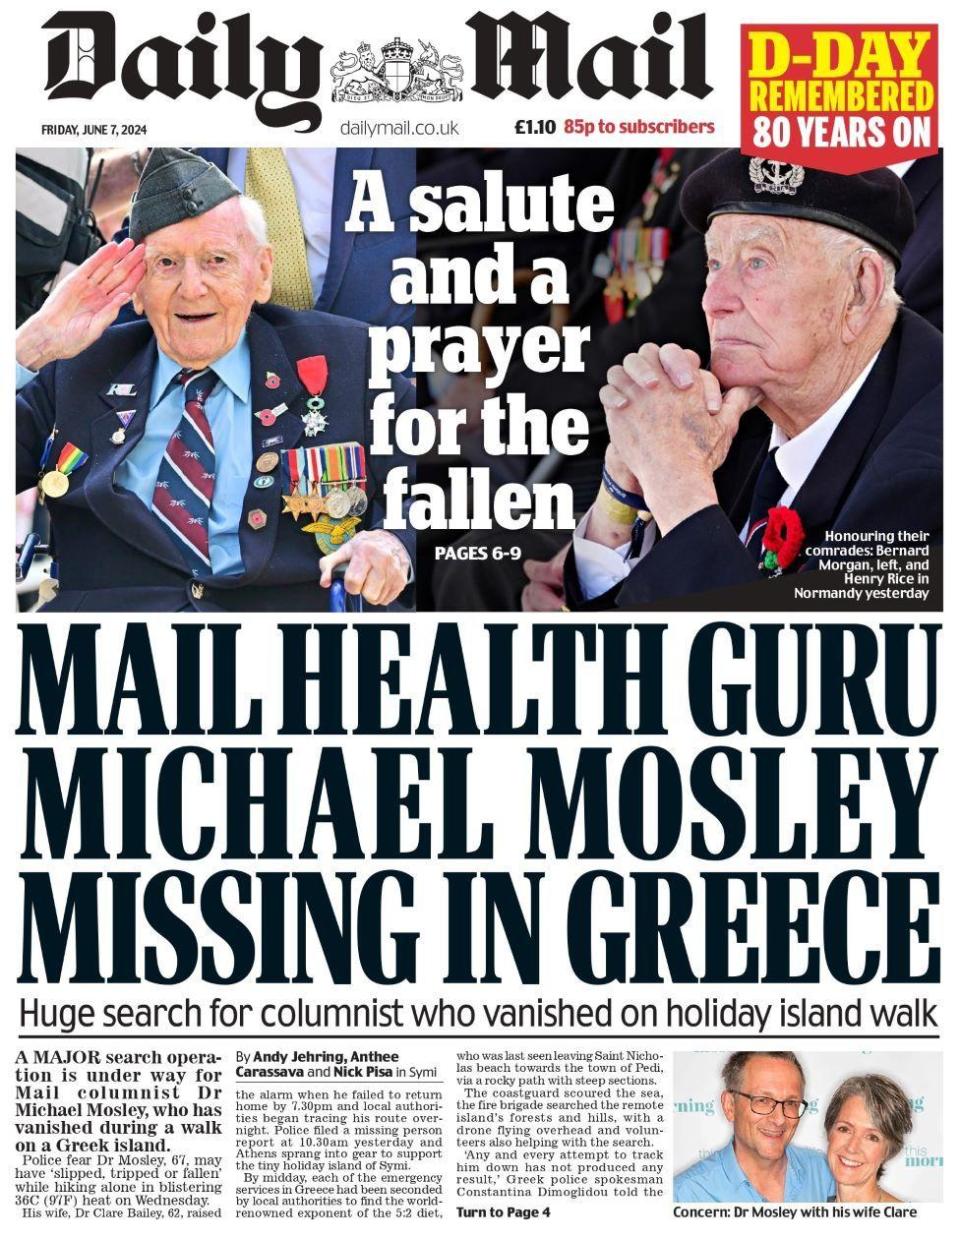 Mail health guru Michael Mosley missing in Greece, reads the Daily Mail